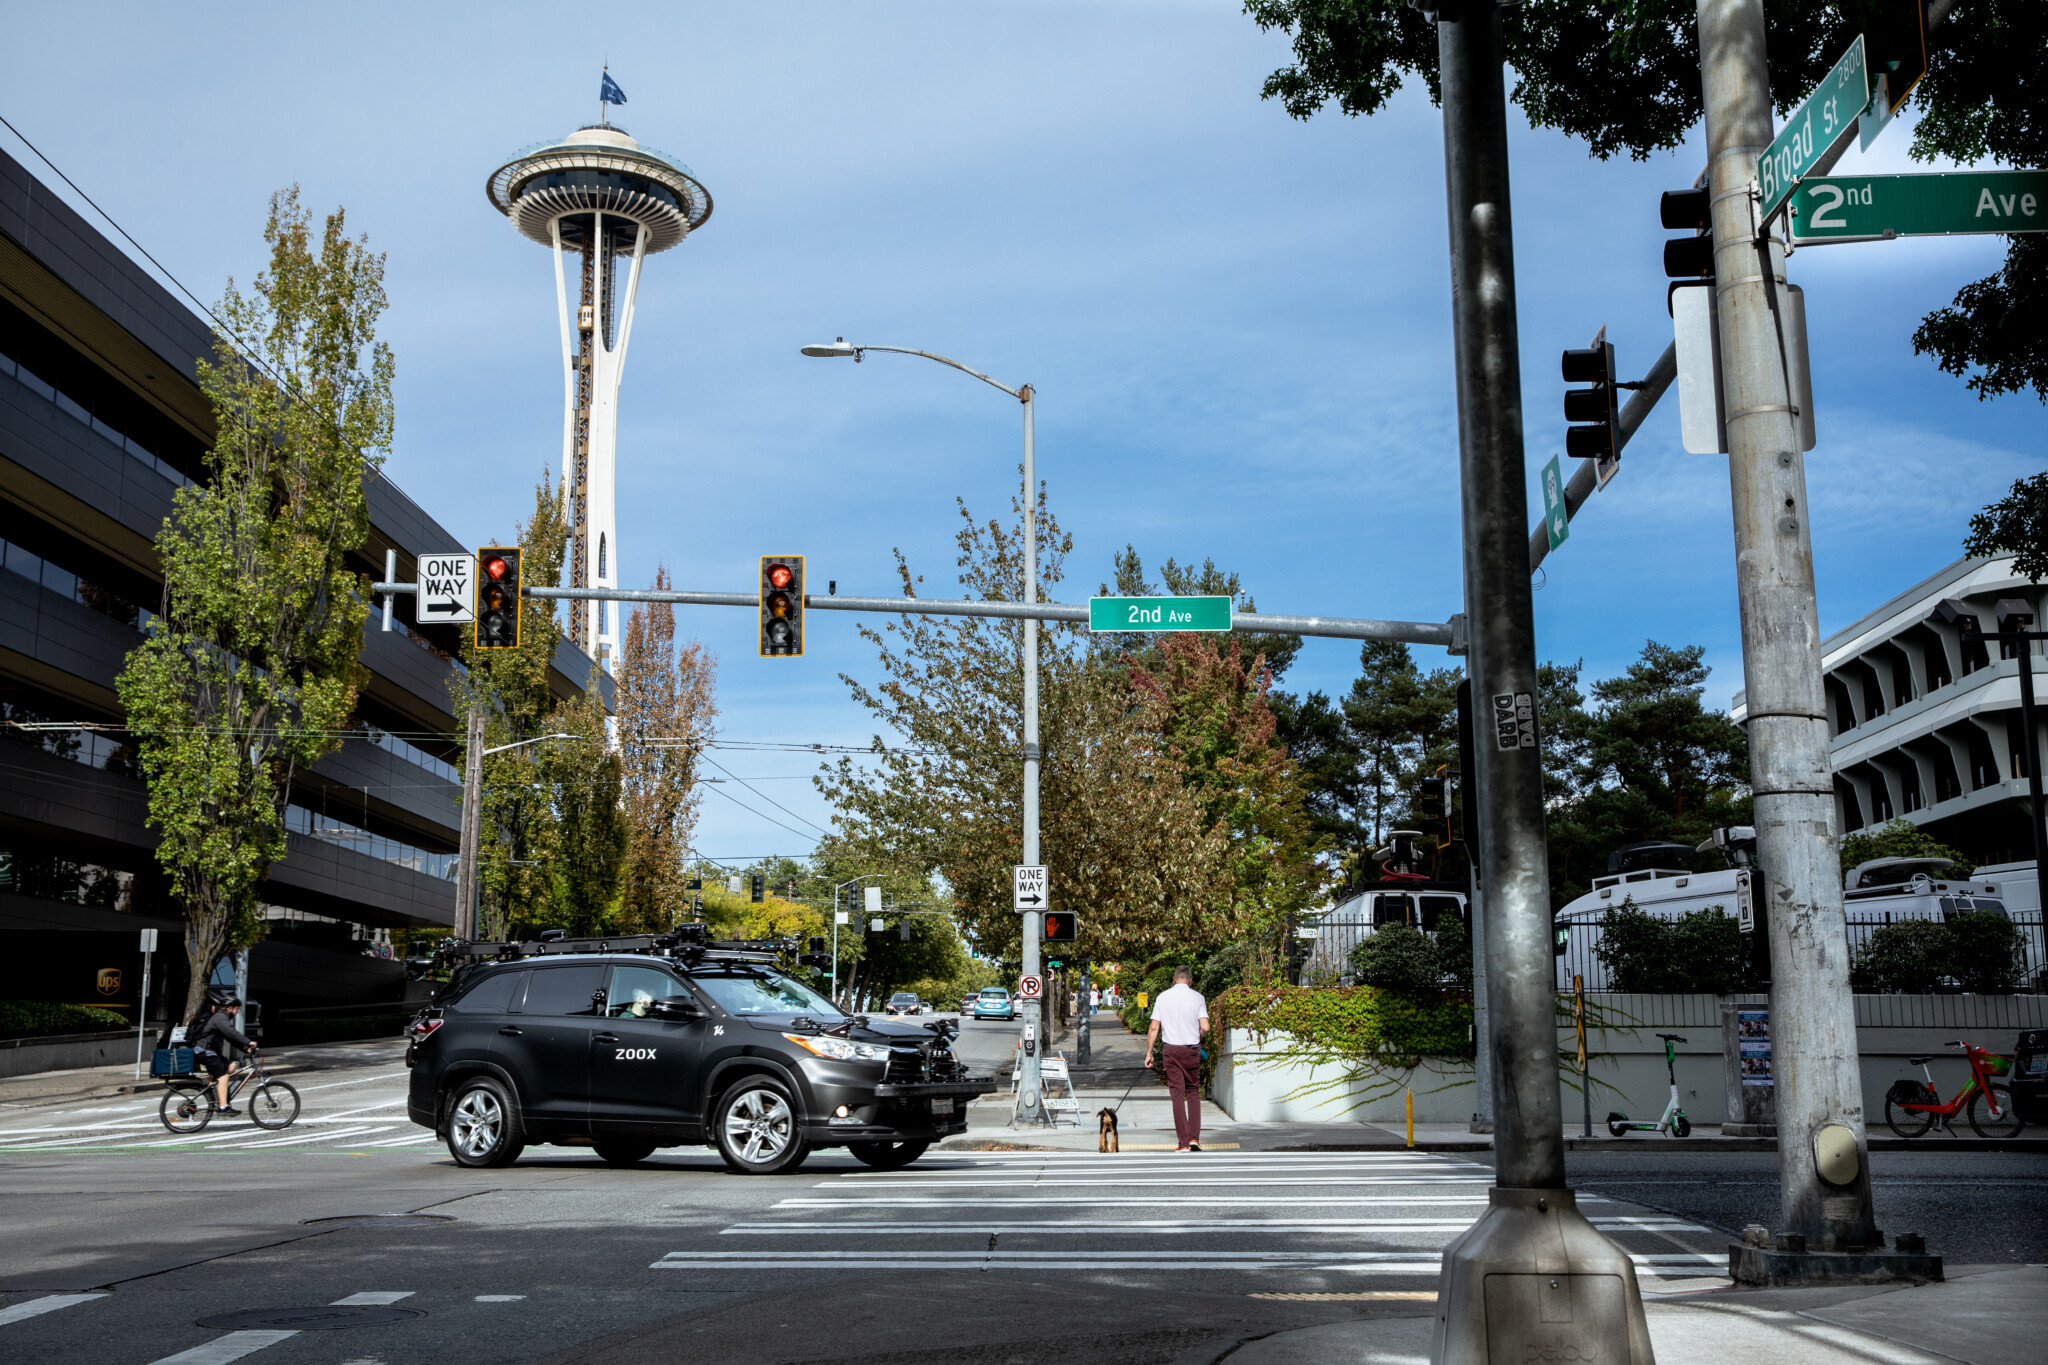 A Zoox test vehicle drives in front of the Seattle Space Needle